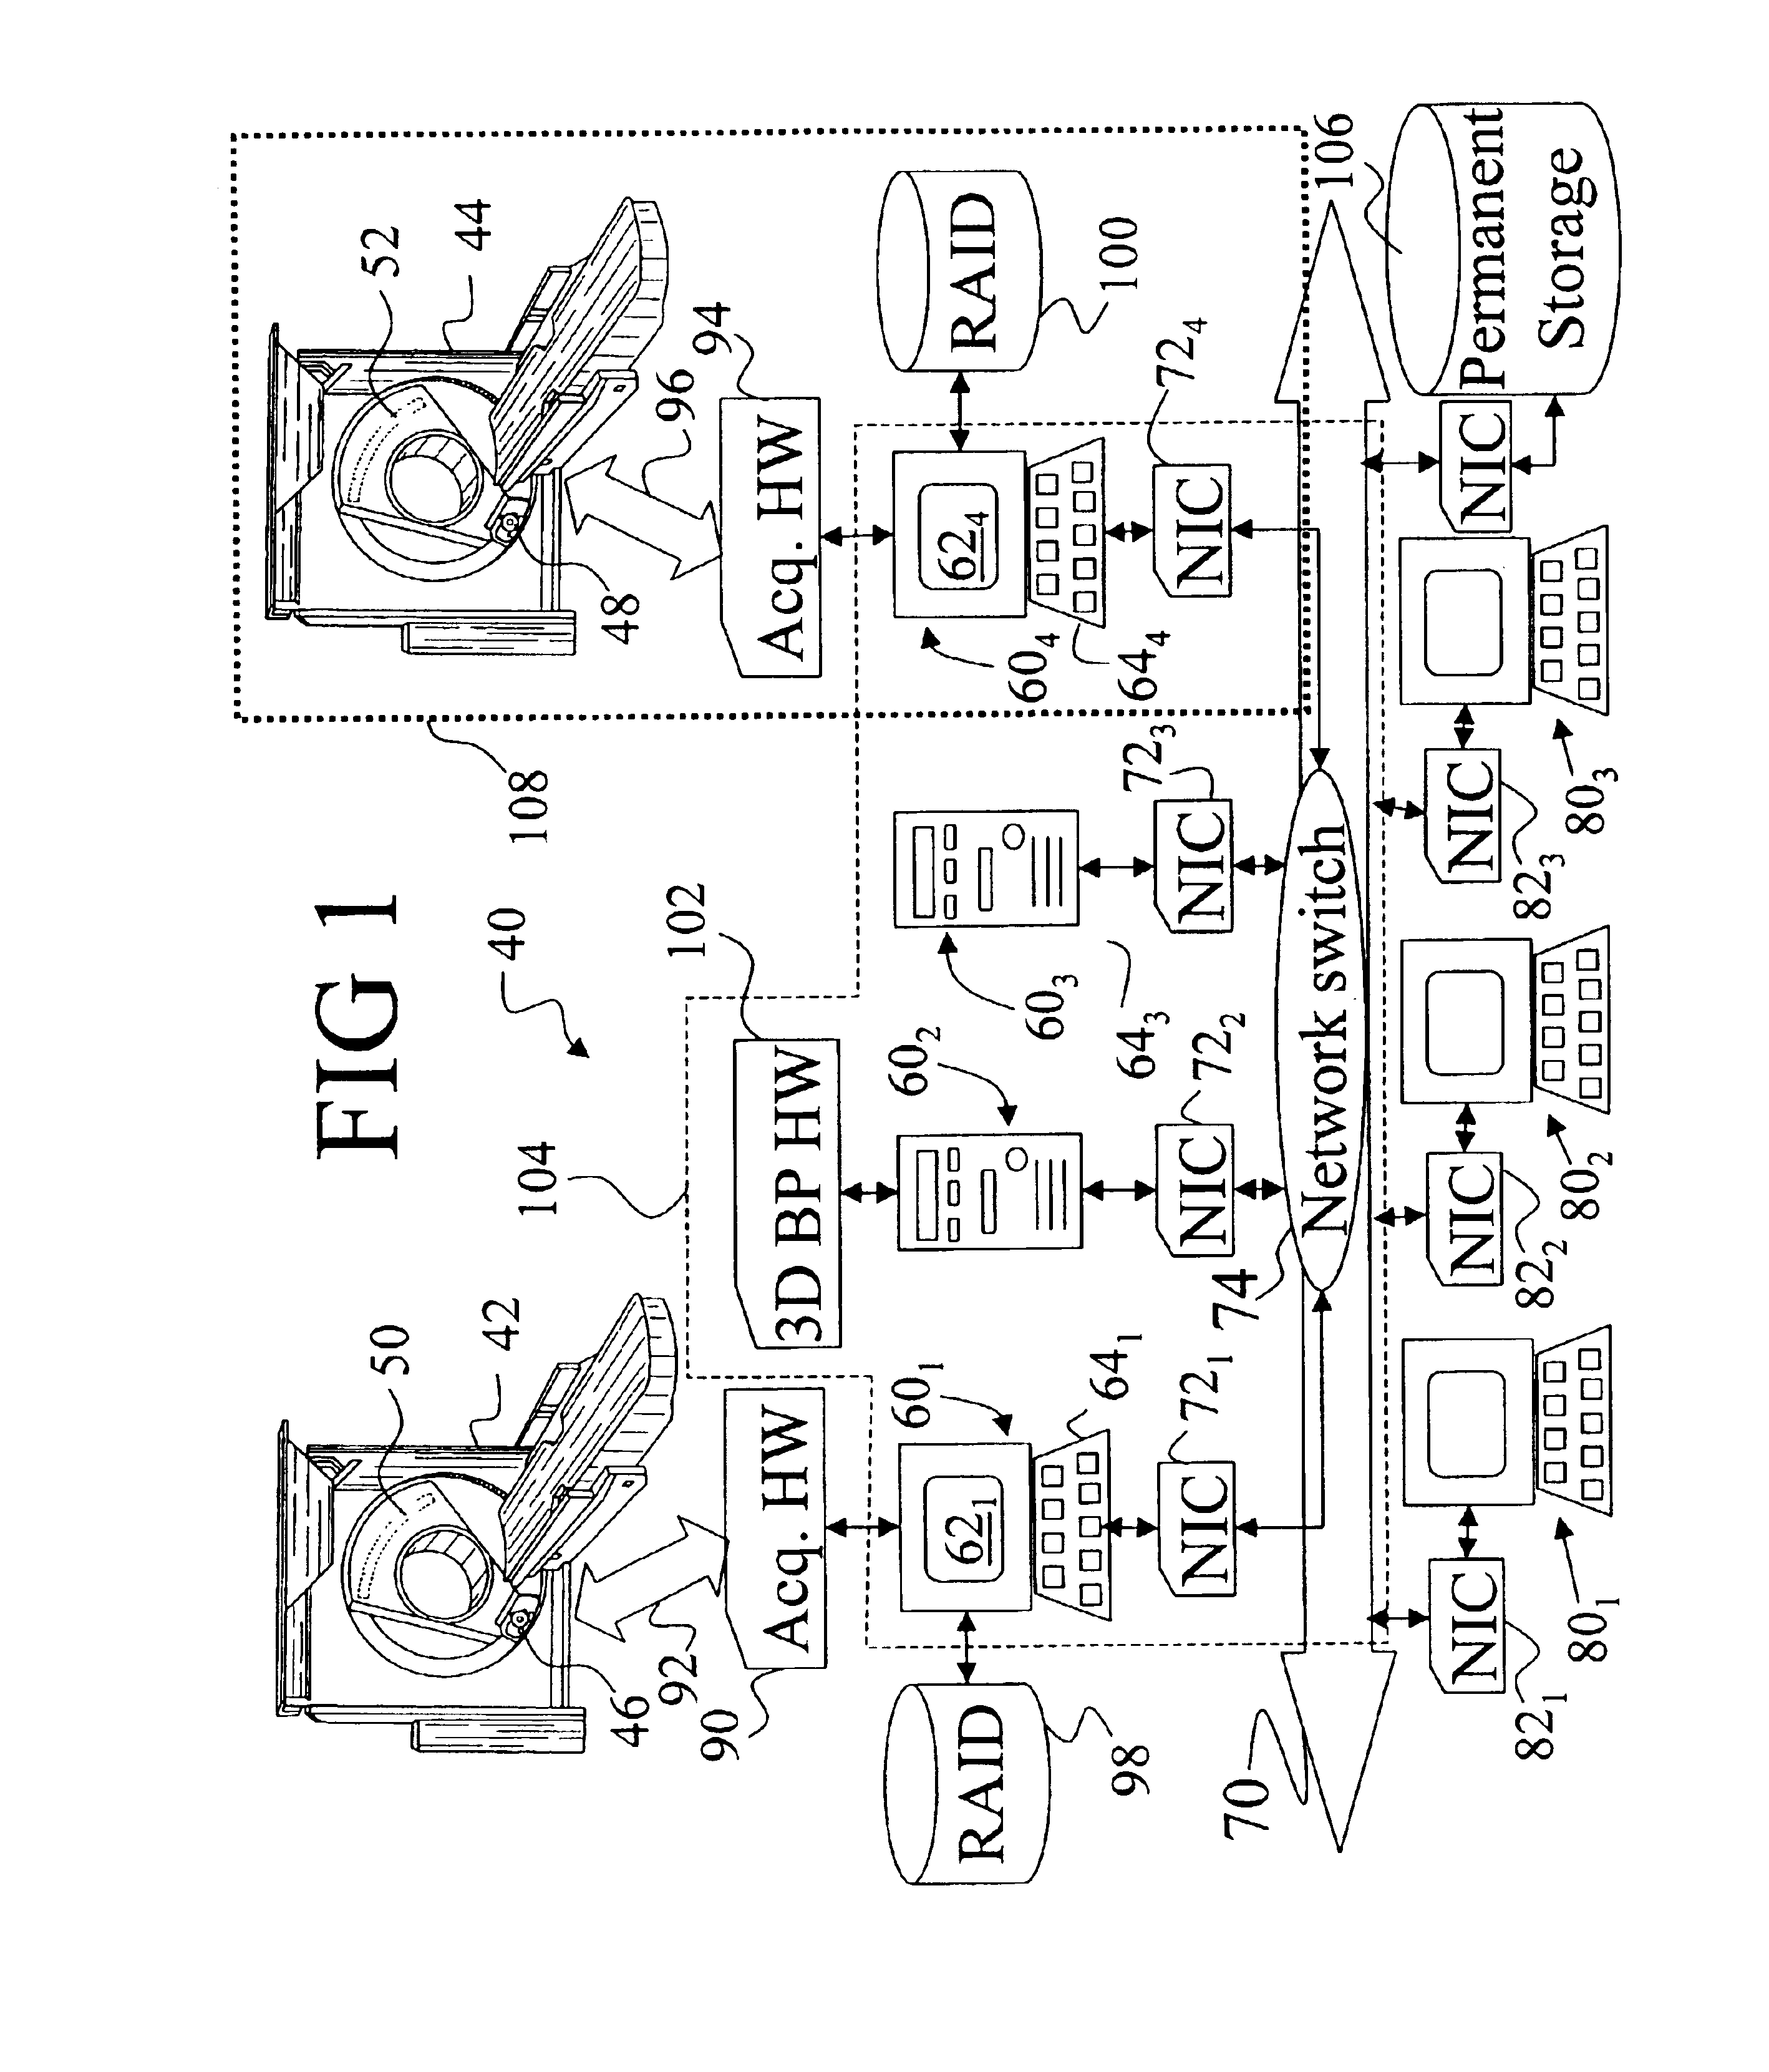 Method and apparatus for computed tomography imaging